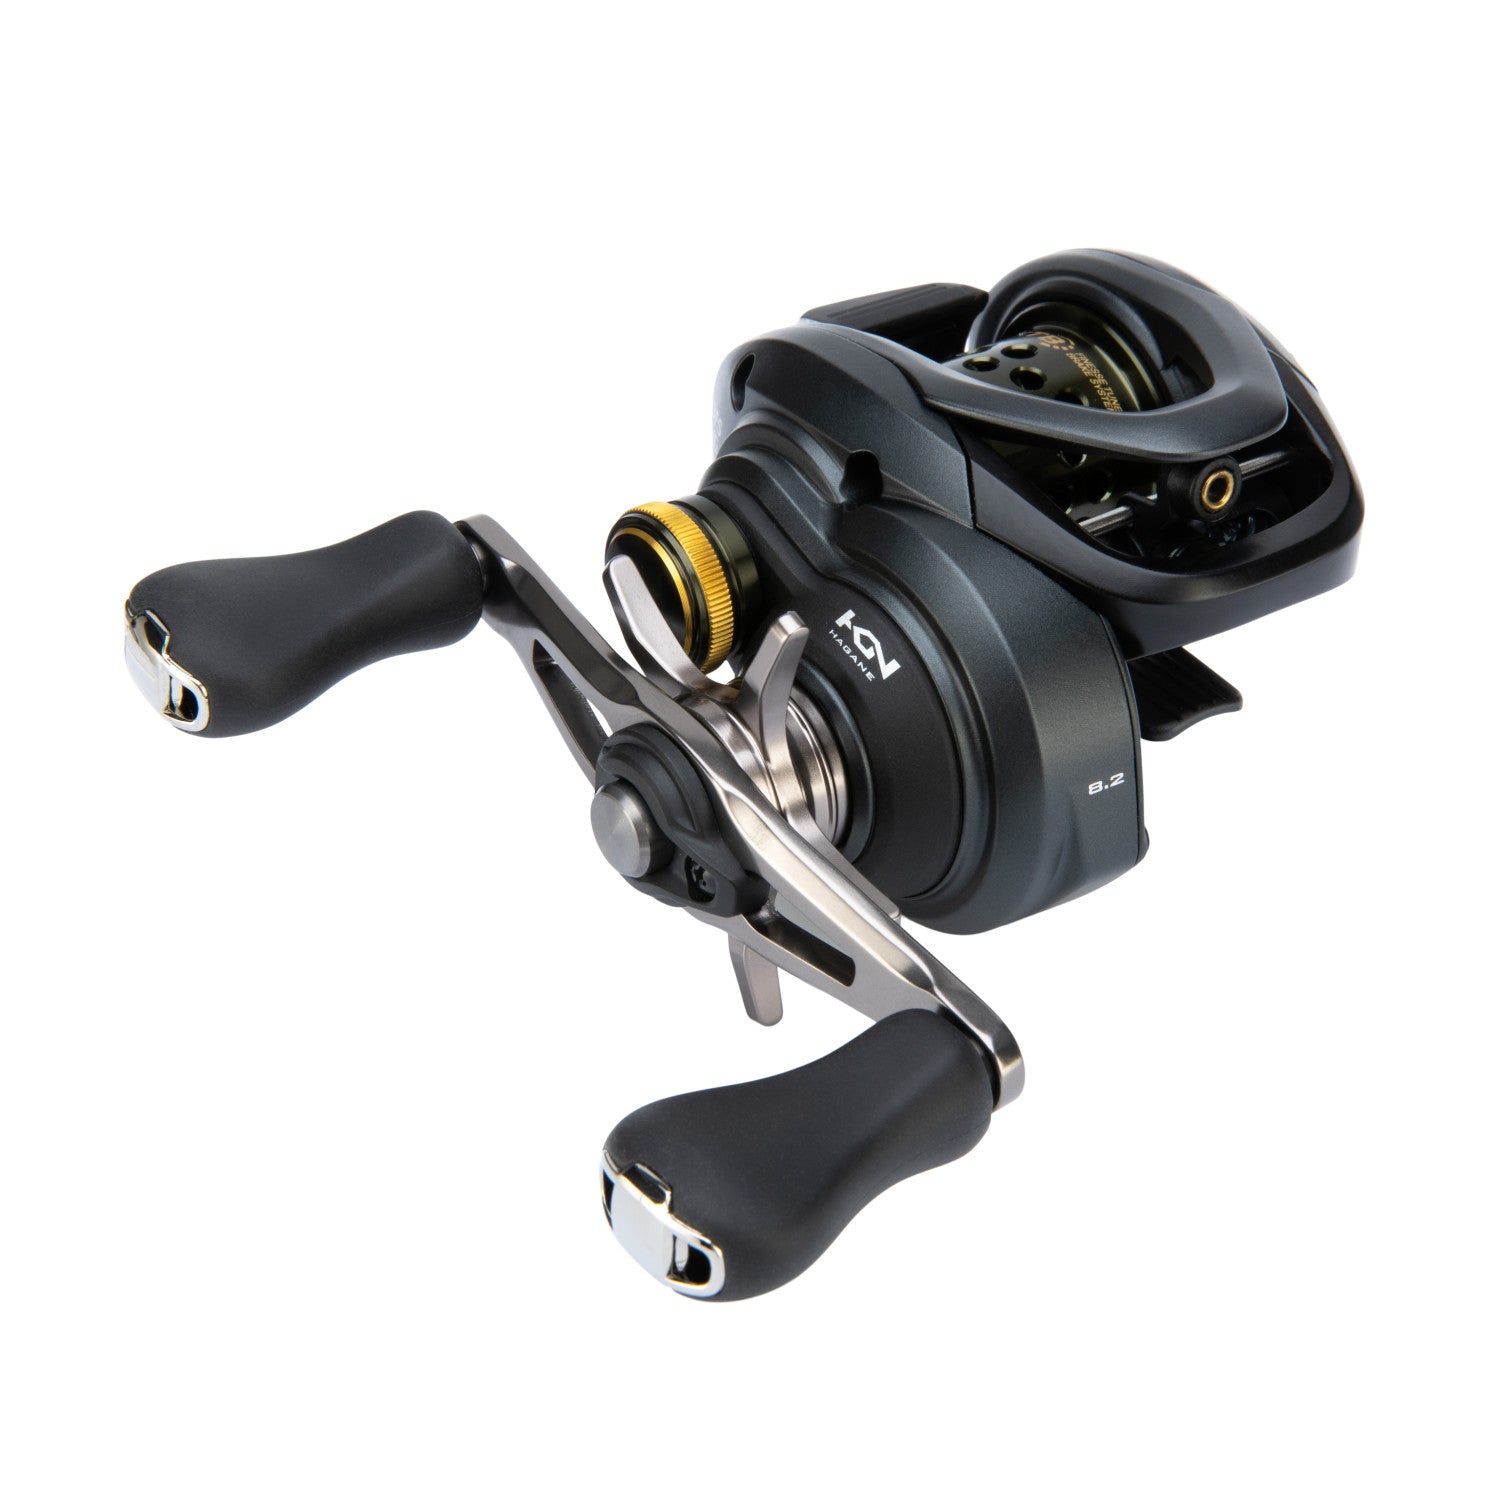 Fishing with the SHIMANO Chronarch MGL and Chronarch G (Best reels under  $300??) 